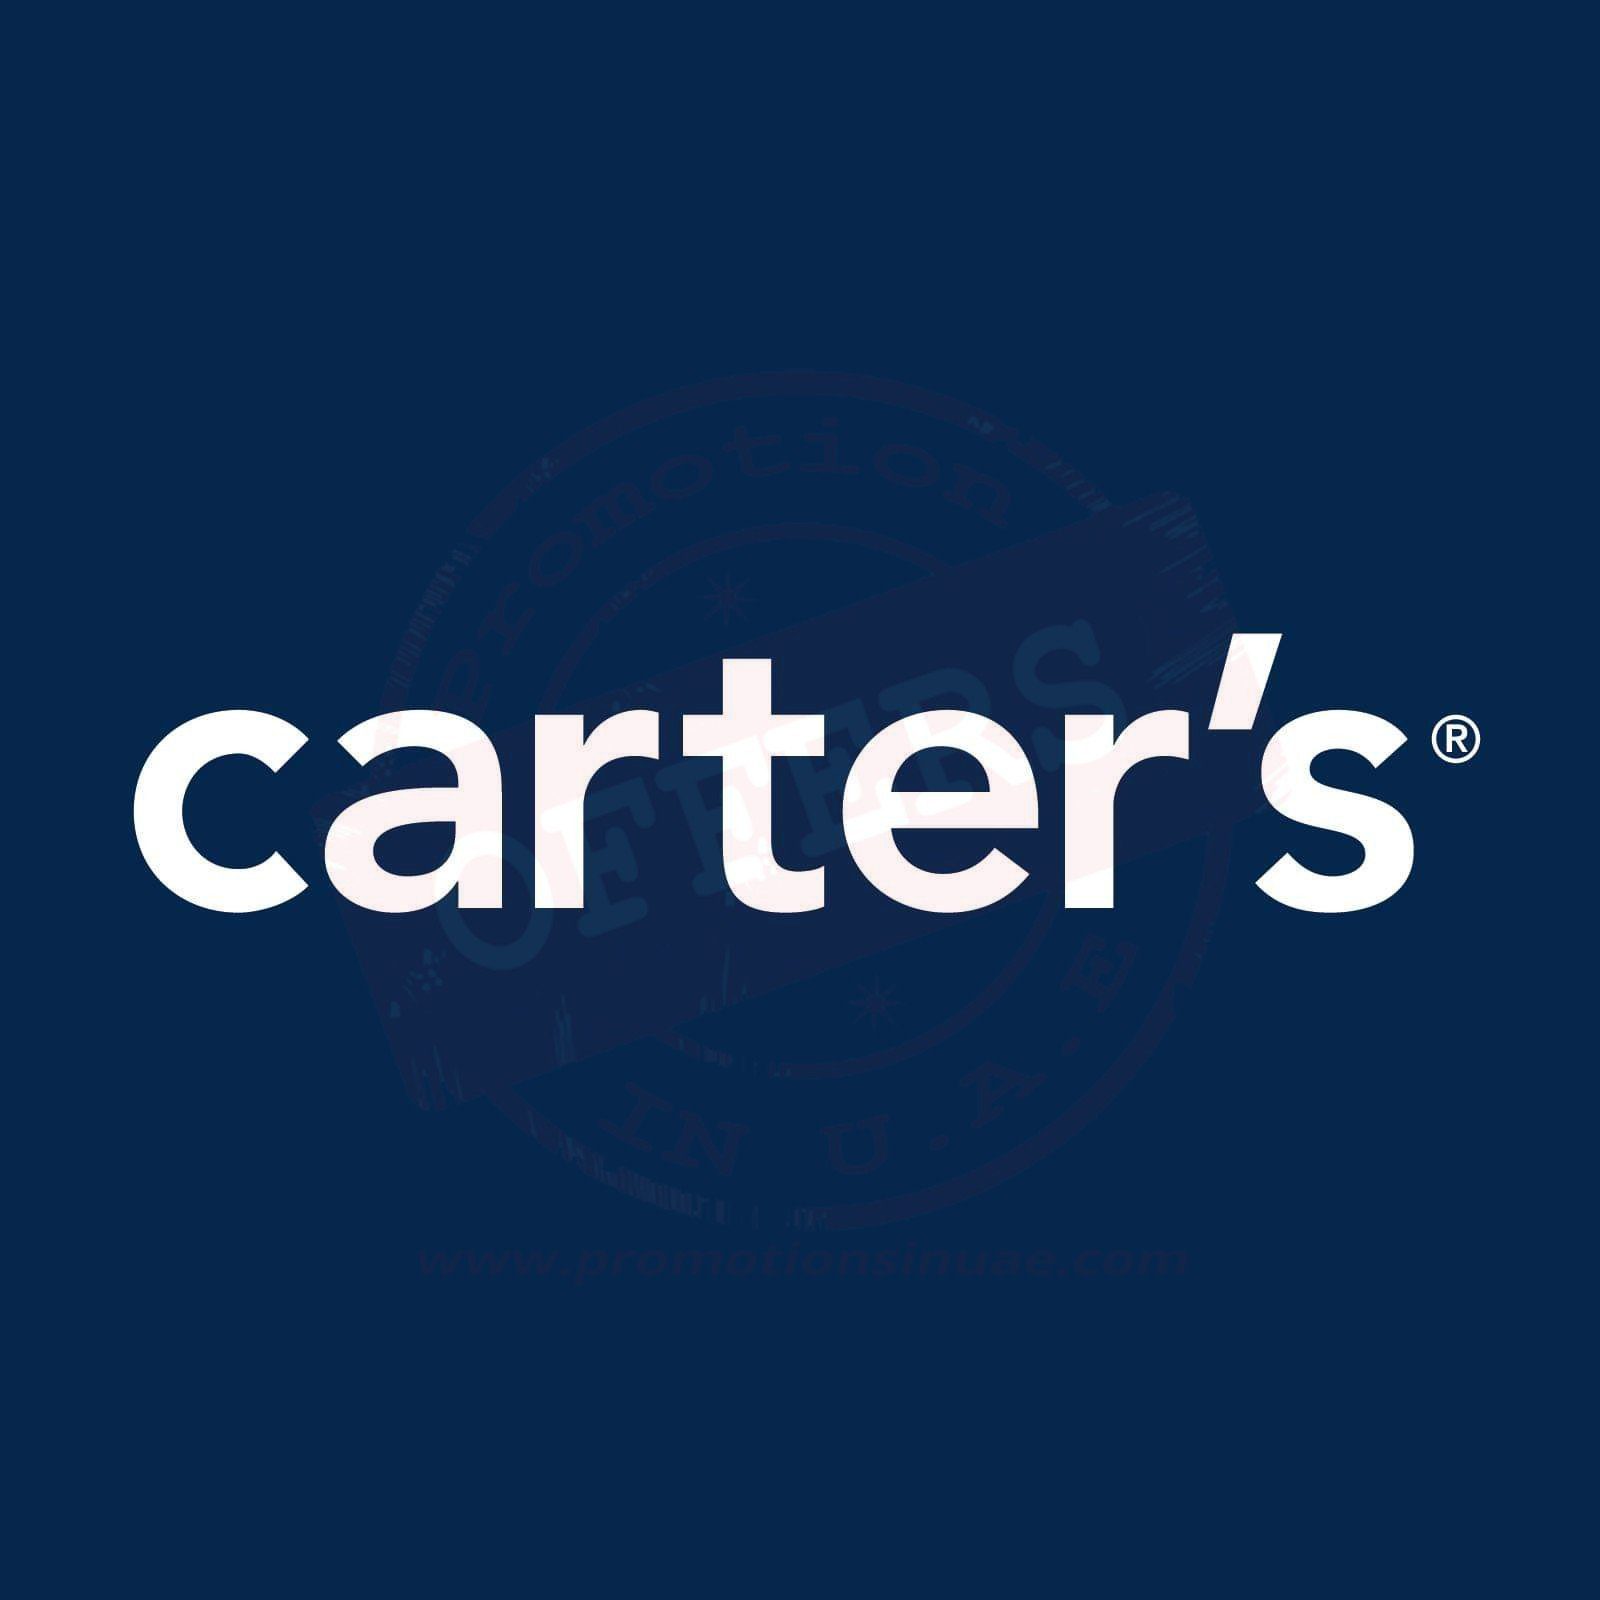 Enjoy 40% to 70% on everything at Carter’s.